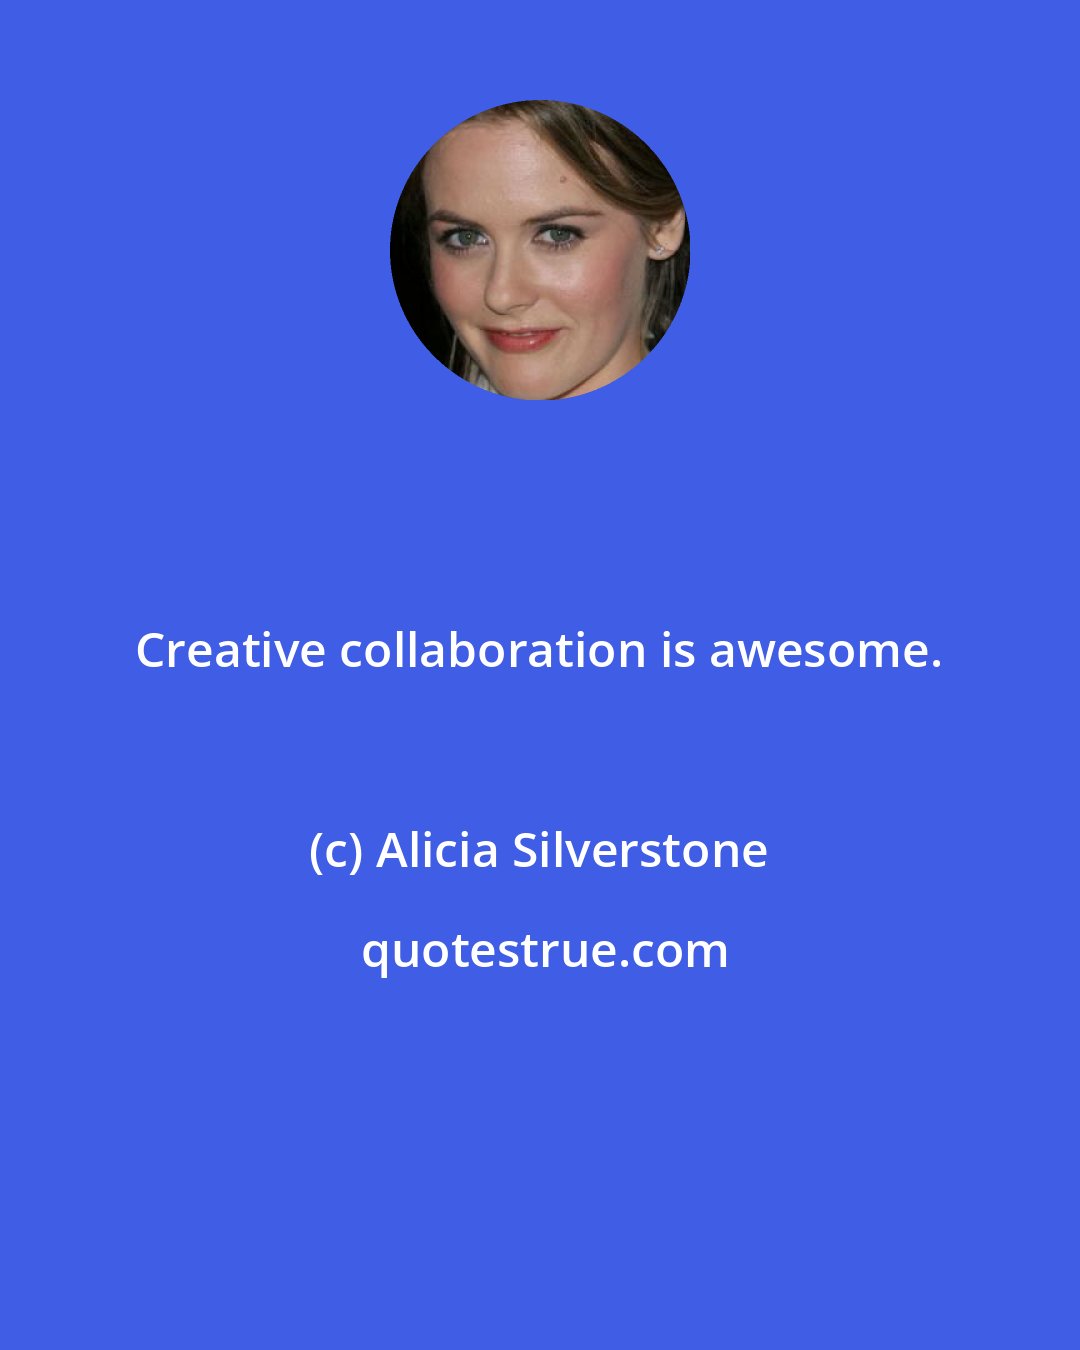 Alicia Silverstone: Creative collaboration is awesome.